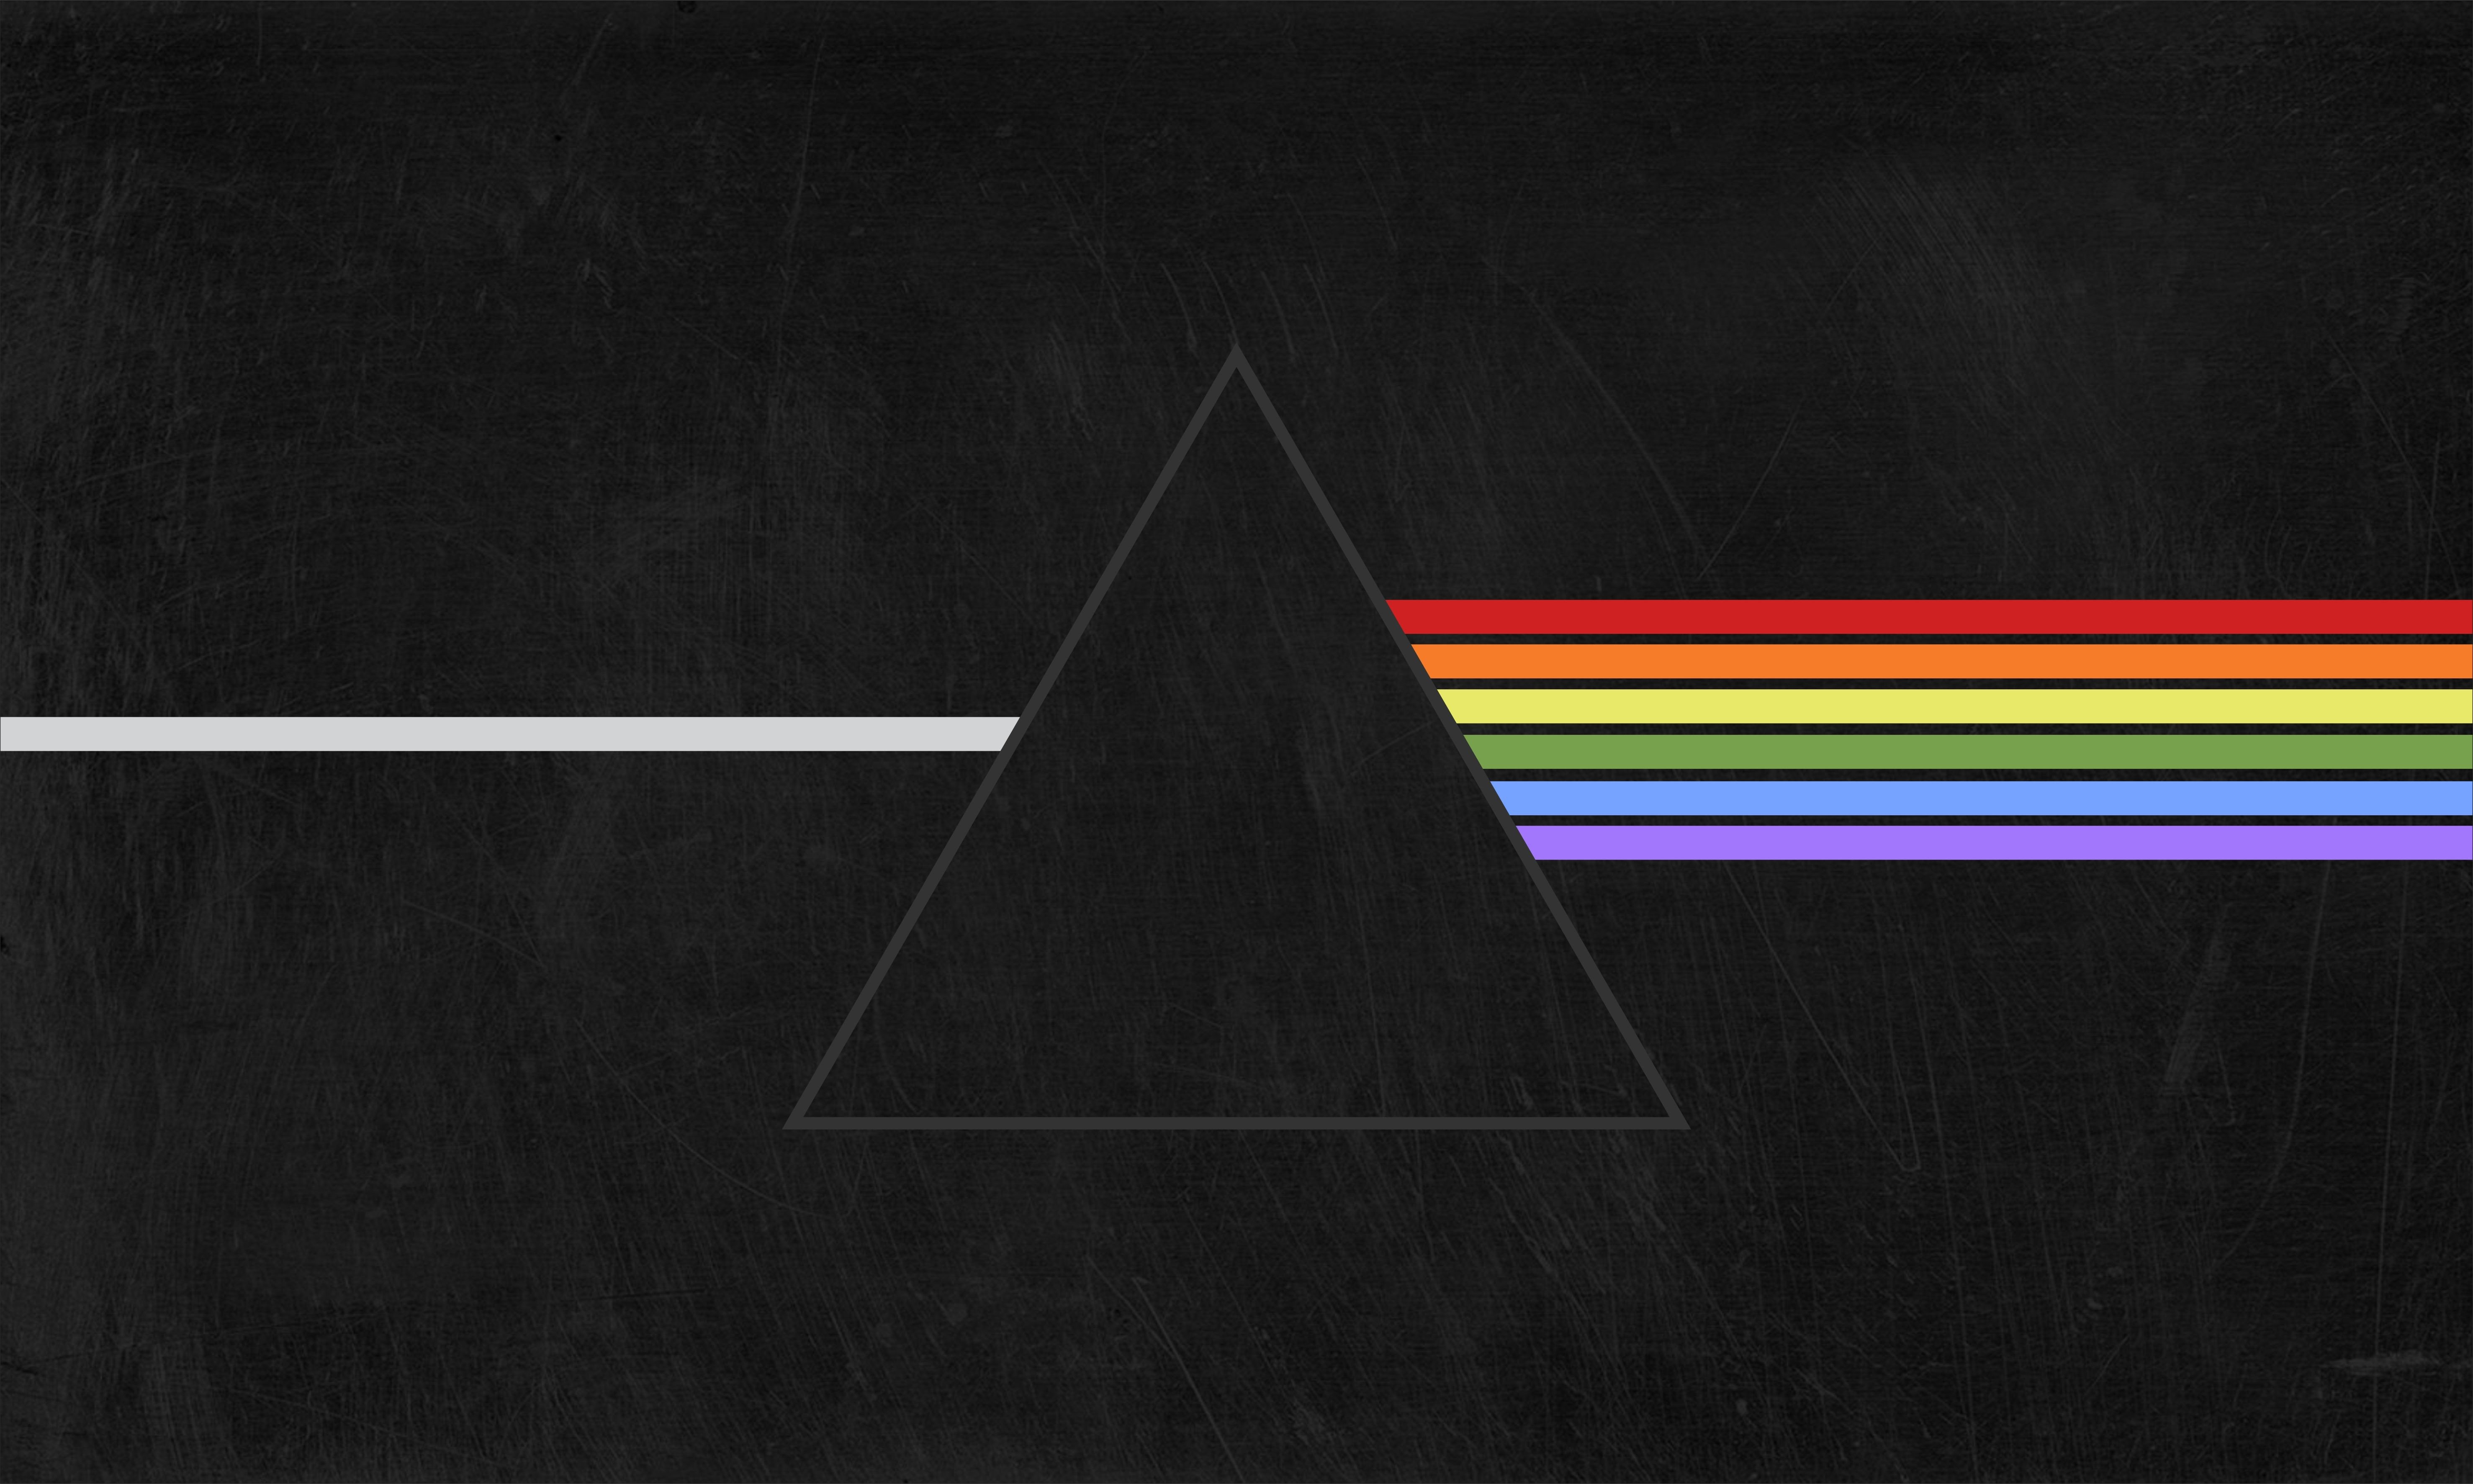 Pink Floyd, Triangle, Prism, The Dark Side of the Moon, Black, Vector